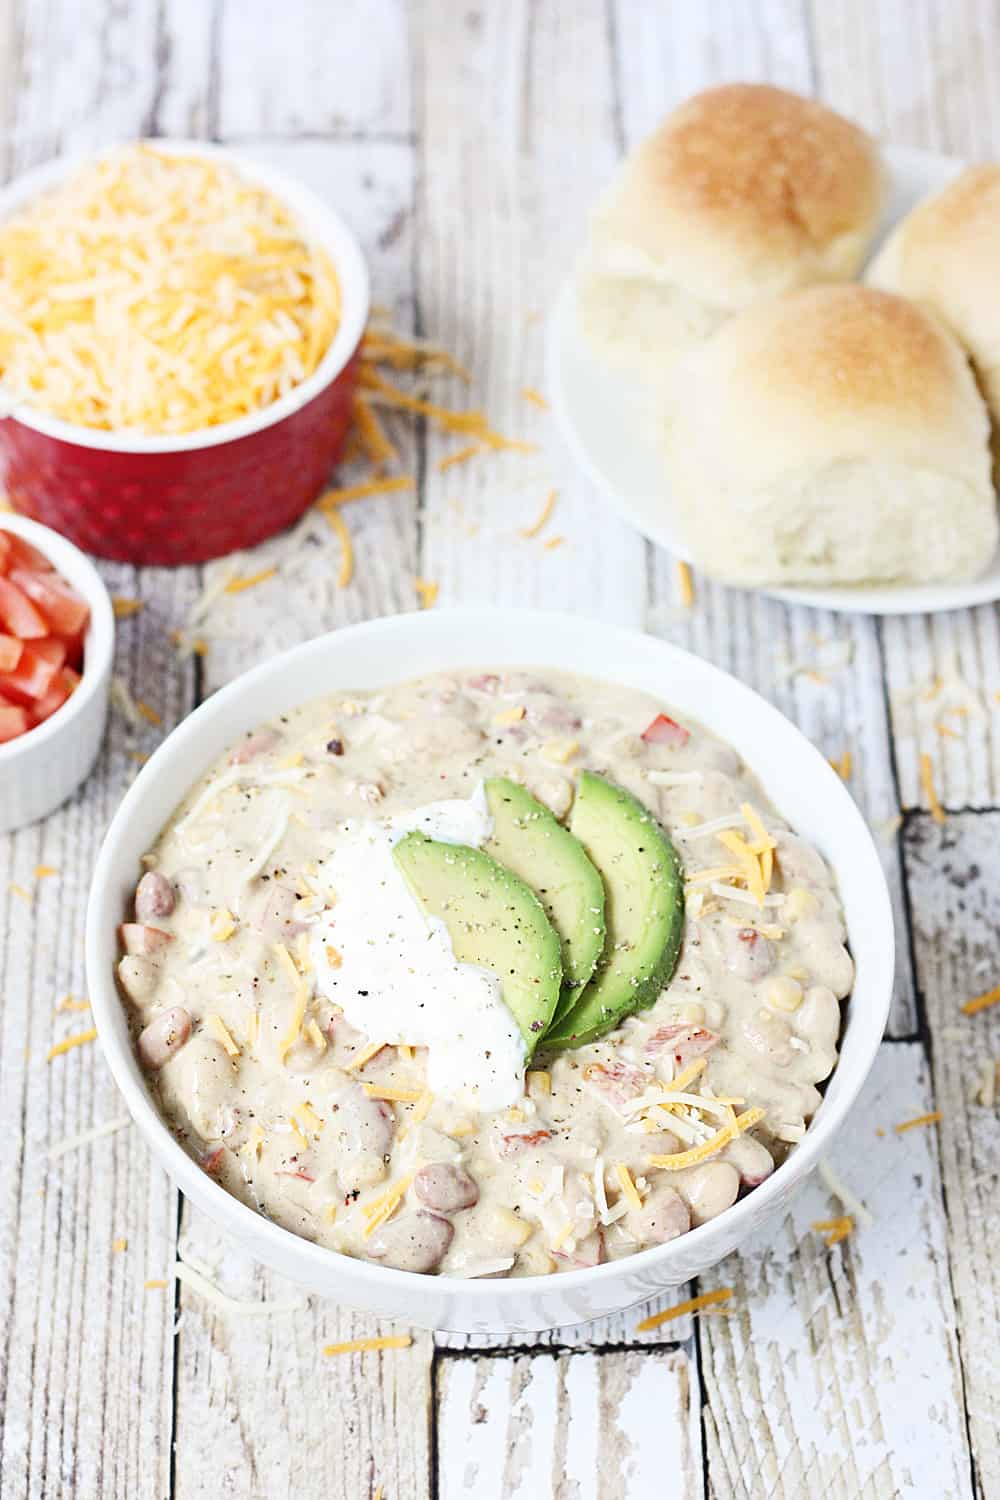 Easy Vegetarian White Bean Chili -- Busy weeknights call for yummy recipes like this easy vegetarian white bean chili. Bell pepper, onion, and corn make it extra hearty!